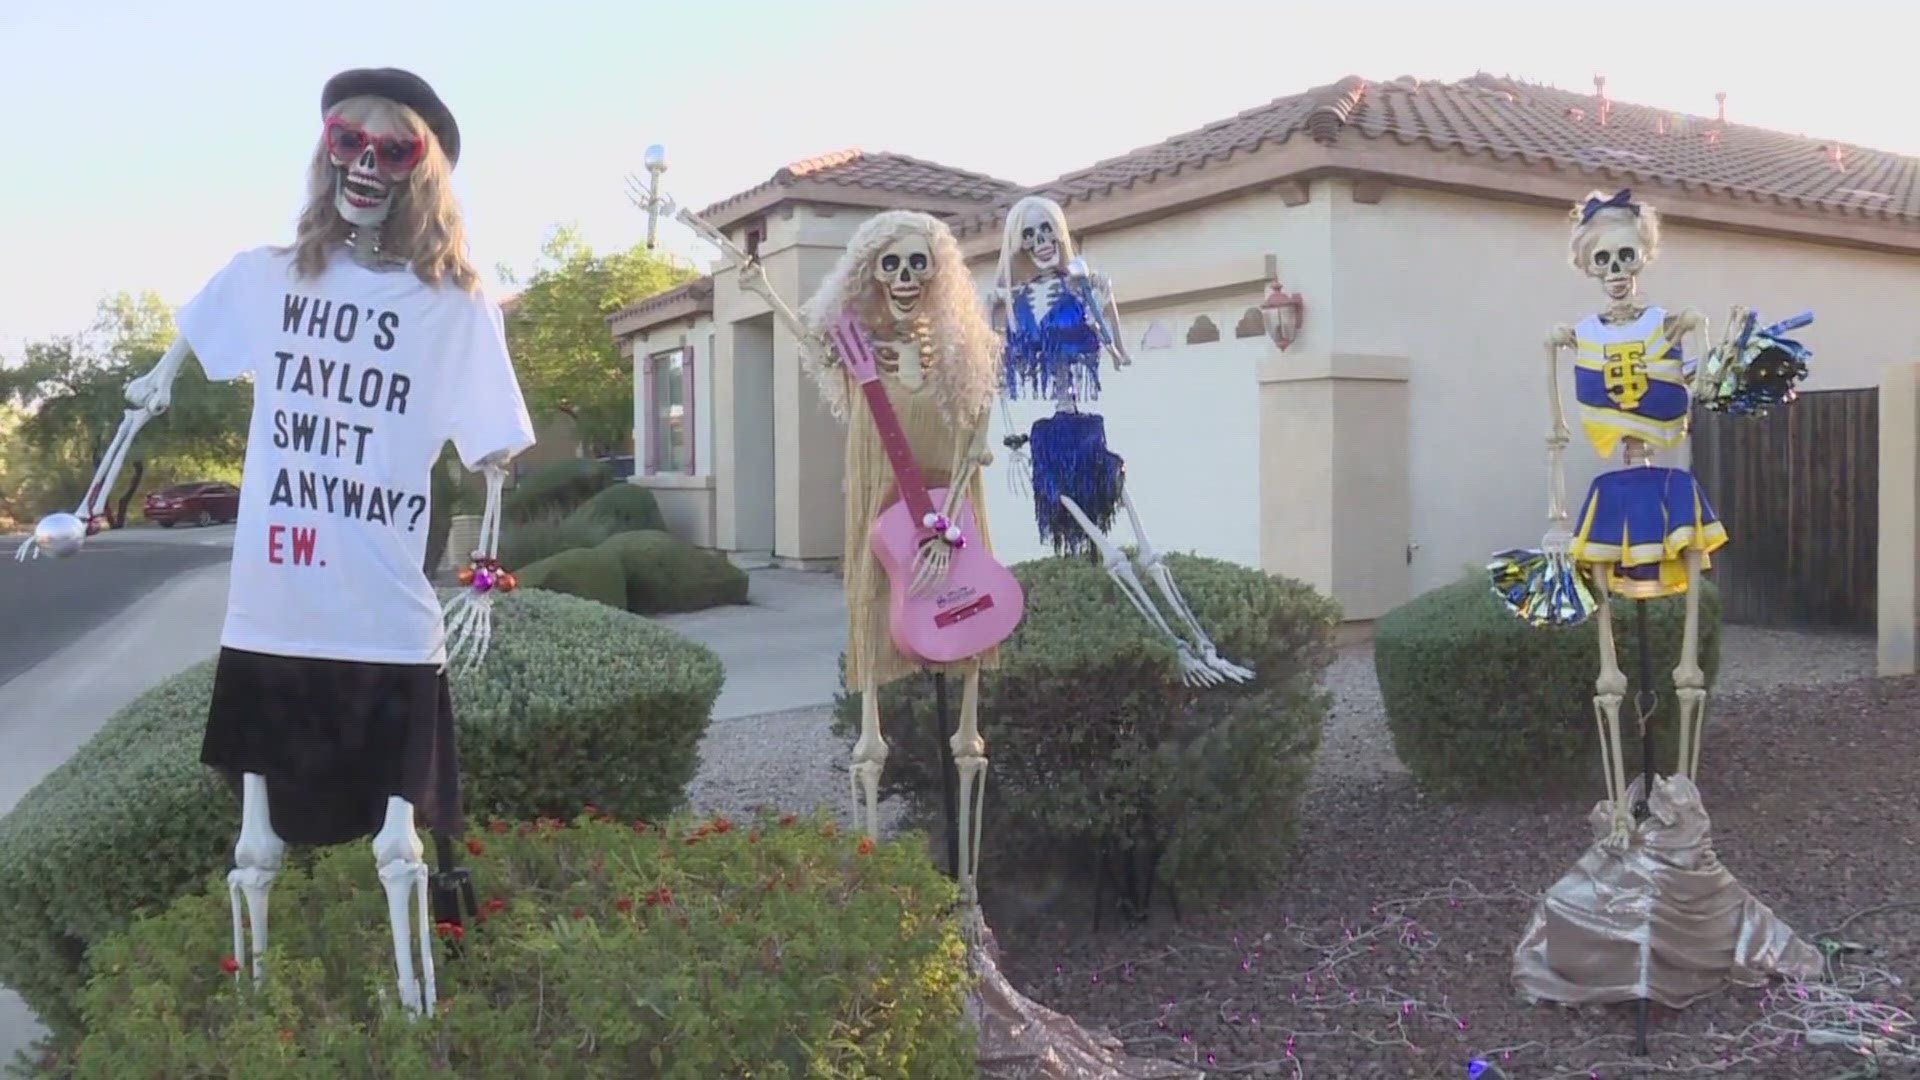 Check out this Taylor Swift-themed Halloween house in Arizona. It's near Thunderbird Road and 24th Street in Phoenix.